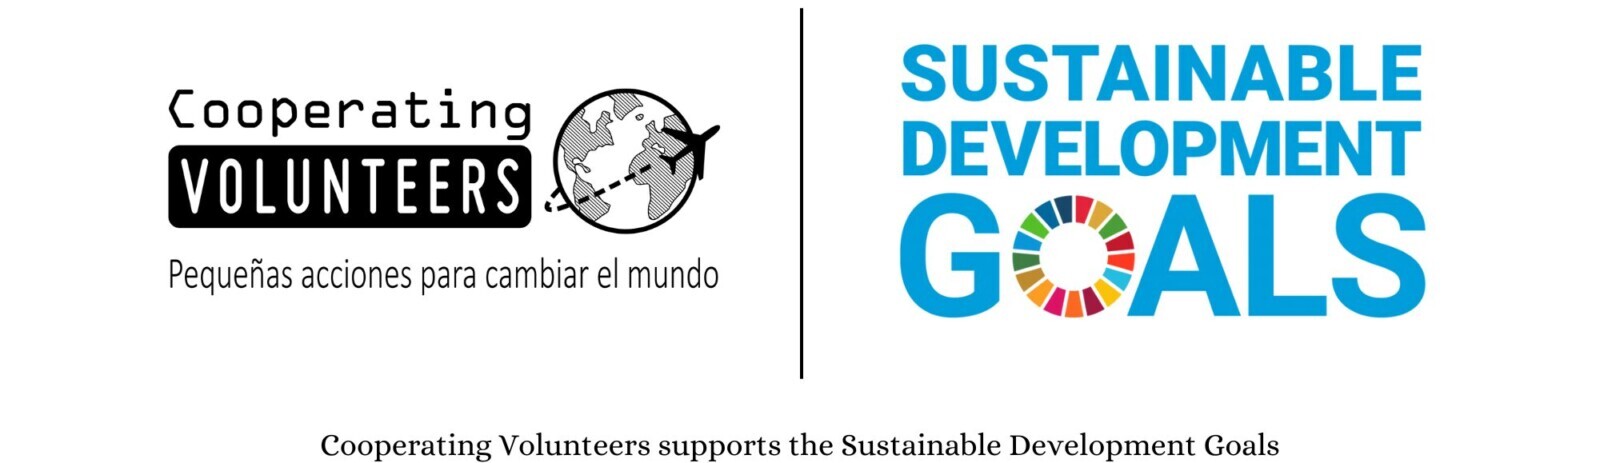 Cooperating-Volunteers-supports-the-Sustainable-Development-Goals-2